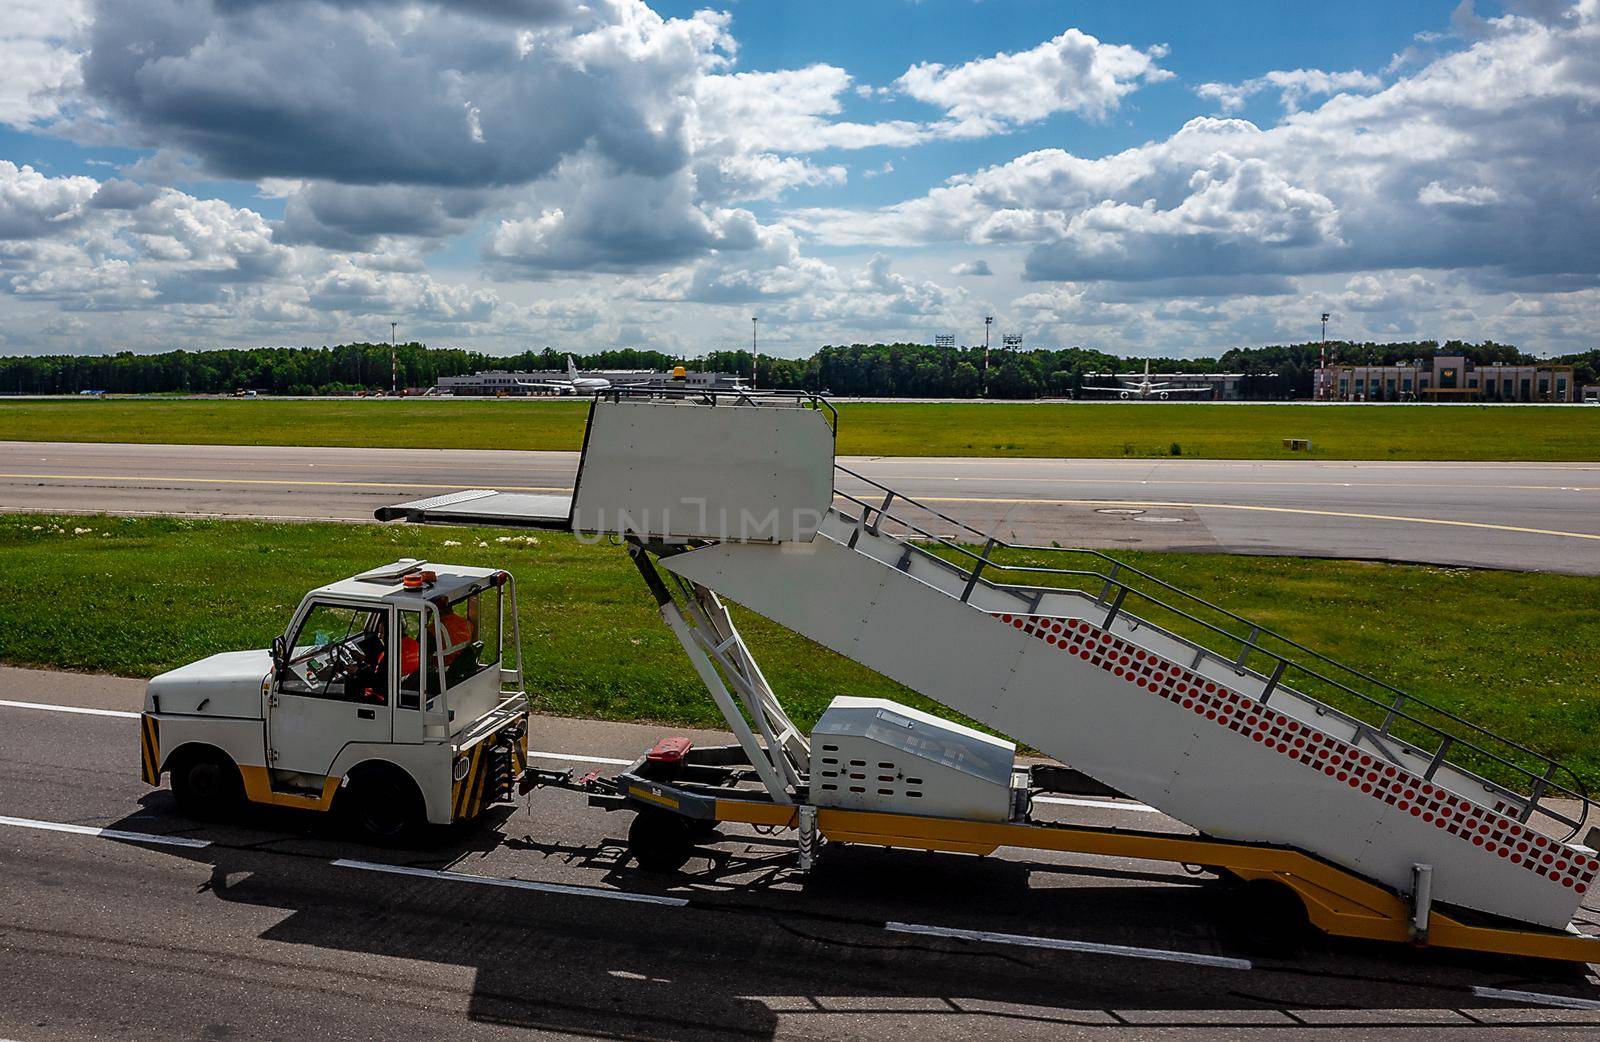 July 2, 2019, Moscow, Russia. Peron transporter tows the ladder to the plane at Vnukovo International Airport.